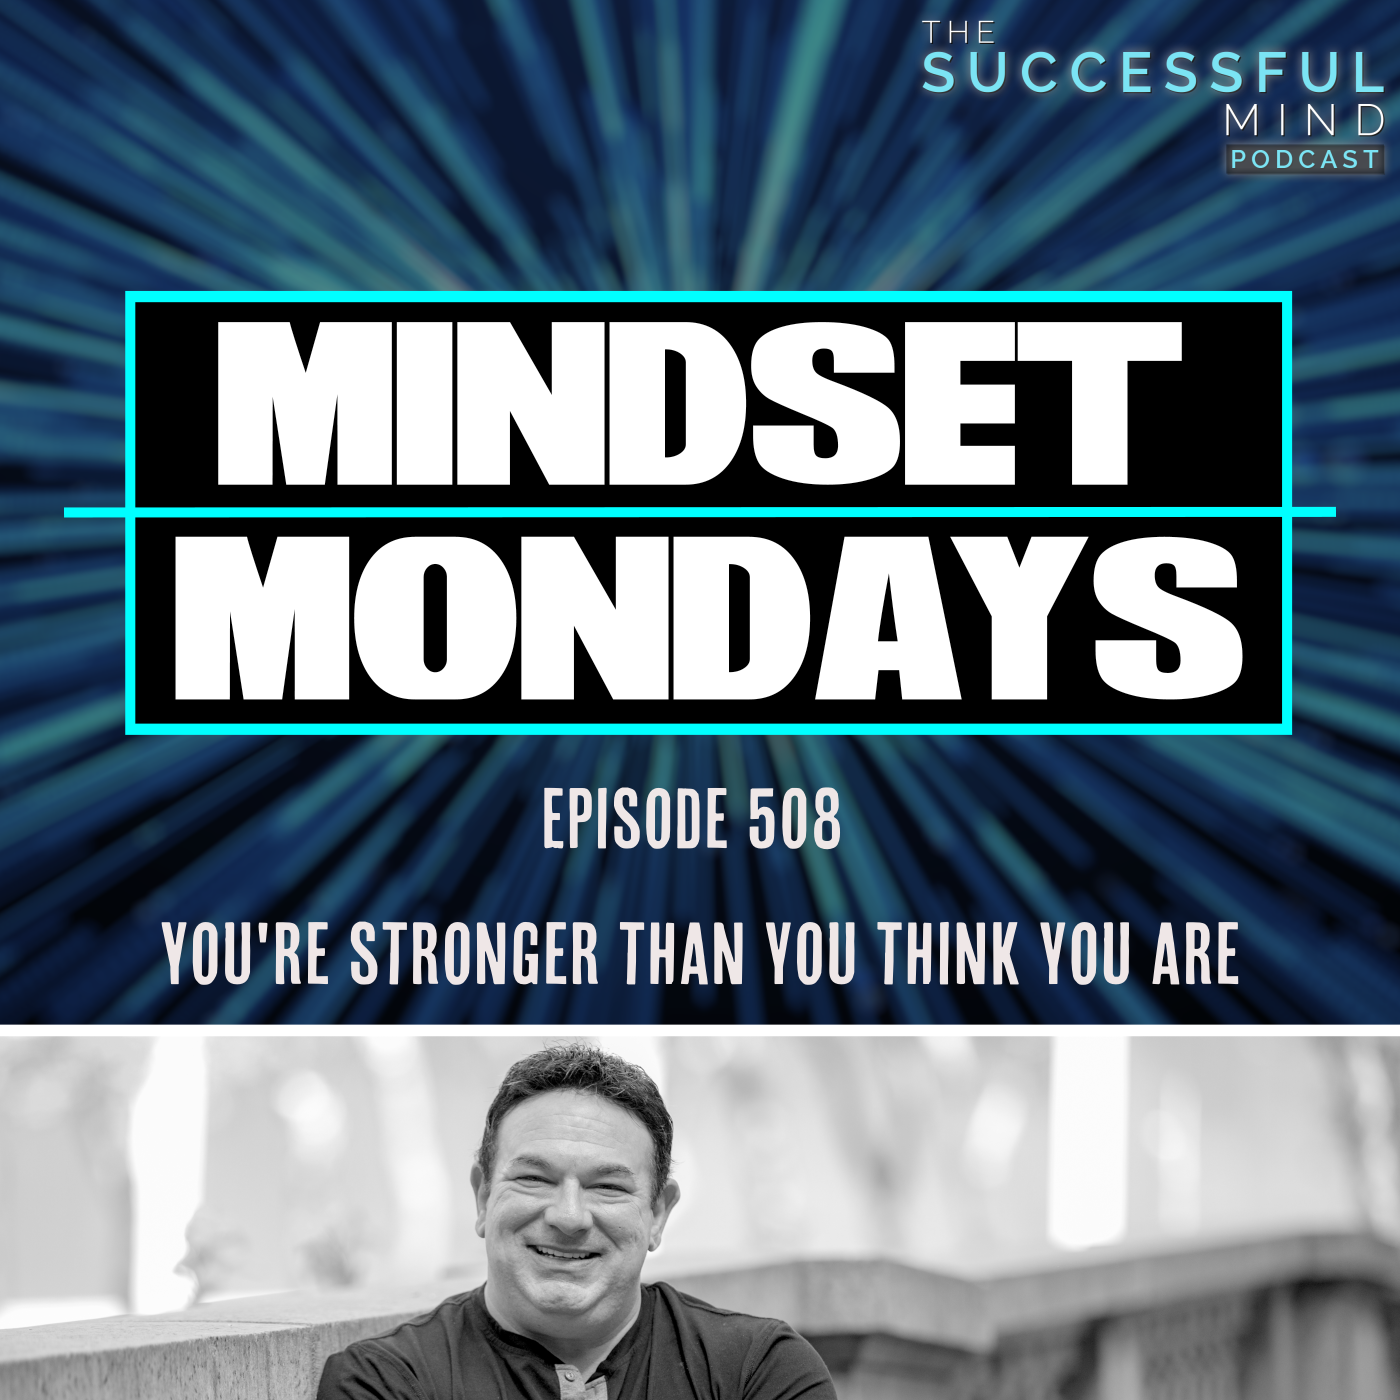 The Successful Mind Podcast – Episode 508 – Mindset Monday’s – You’re Stronger Than You Think You Are